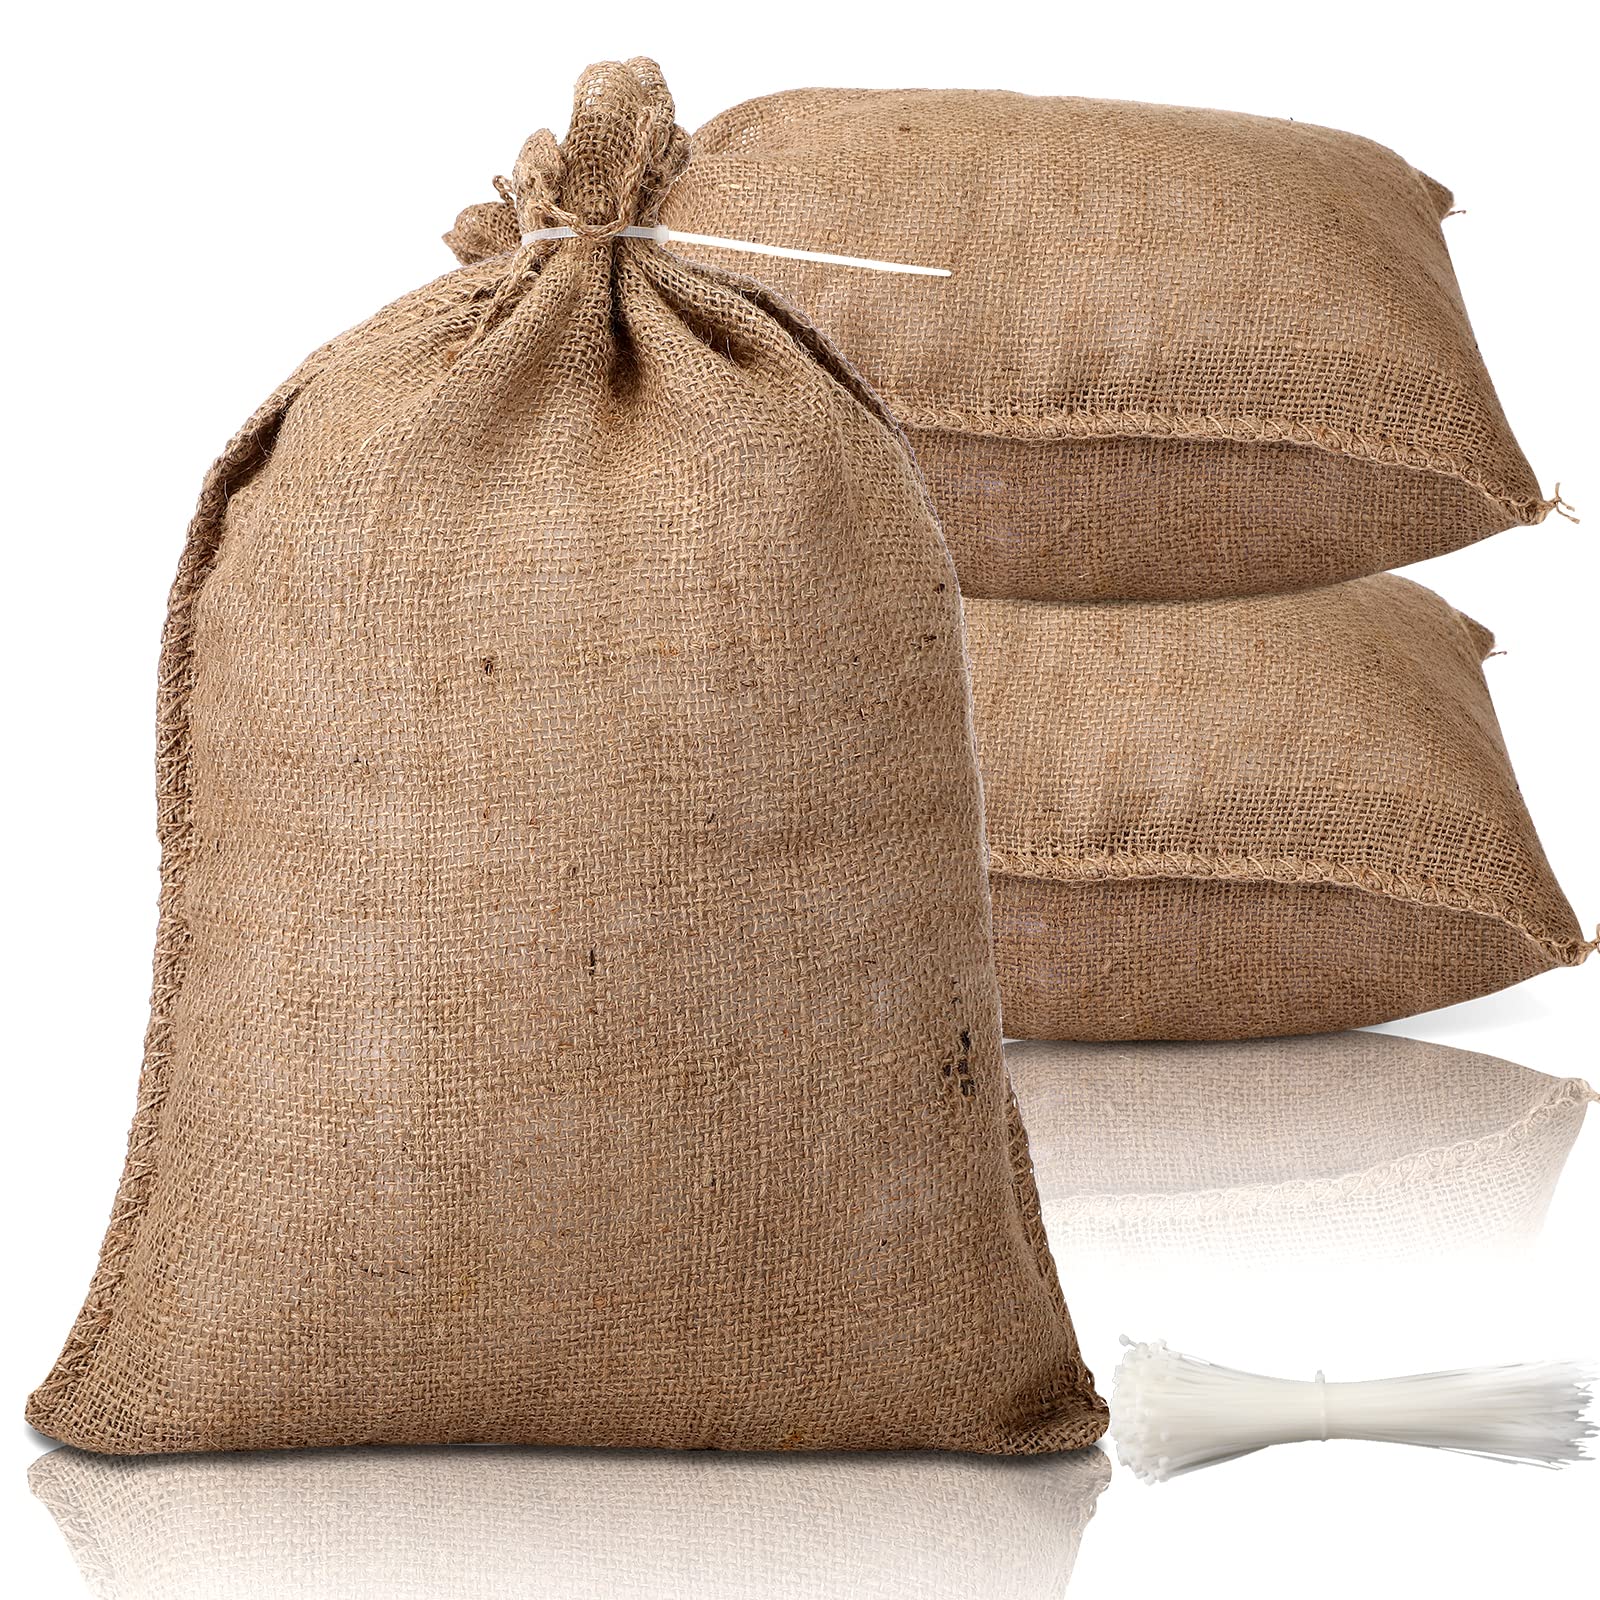 Shappy 10 Pieces Burlap Sand Bag 14 x 26 Empty Sand Bags with Solid Tie  Flood Control Bag Water Barrier Sandbag for Flooding Moving House,Tent  Sandbags, Store Bags